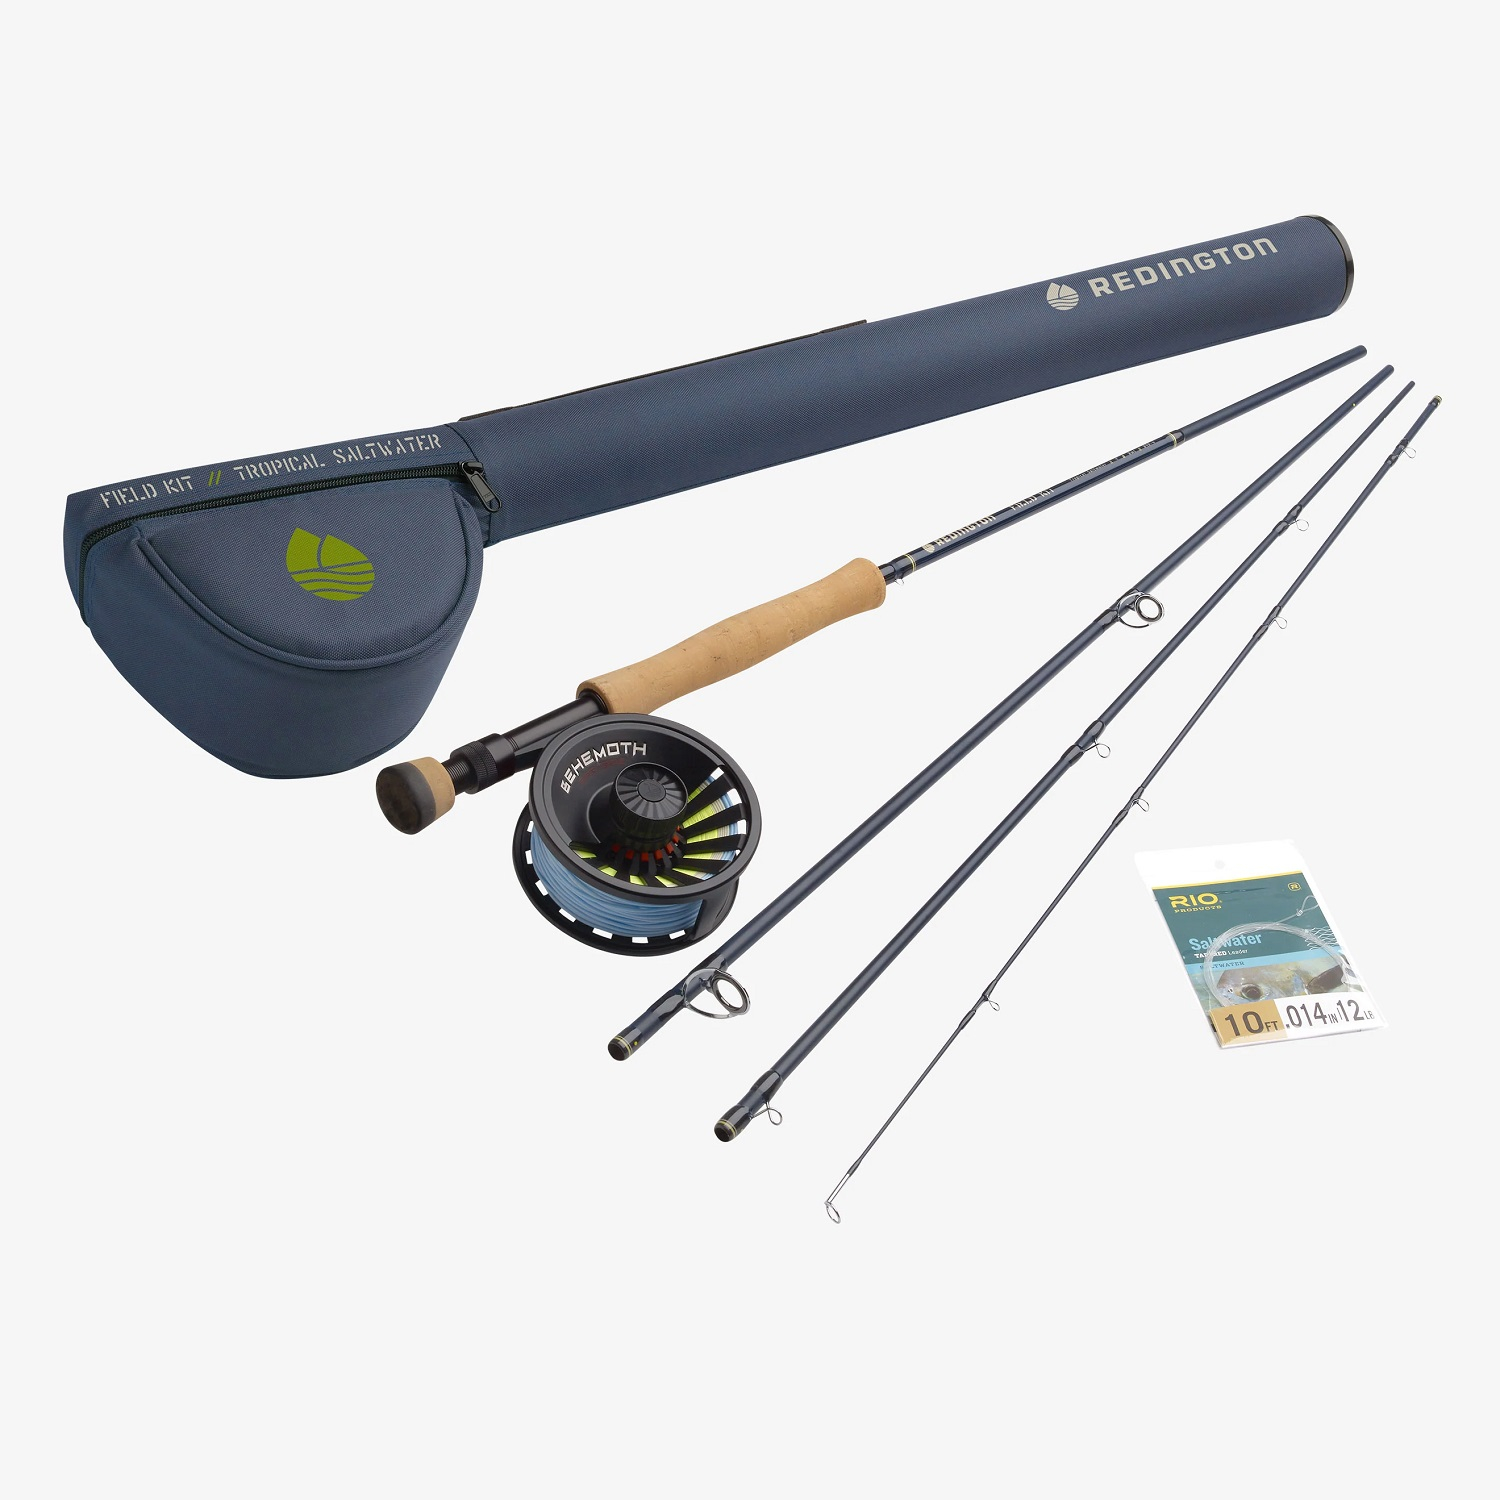 El Jefe Wild Fly Fishing Combo Package | 704 | 7' Four Section 1 Weight Fly  Rod And Reel Outfit